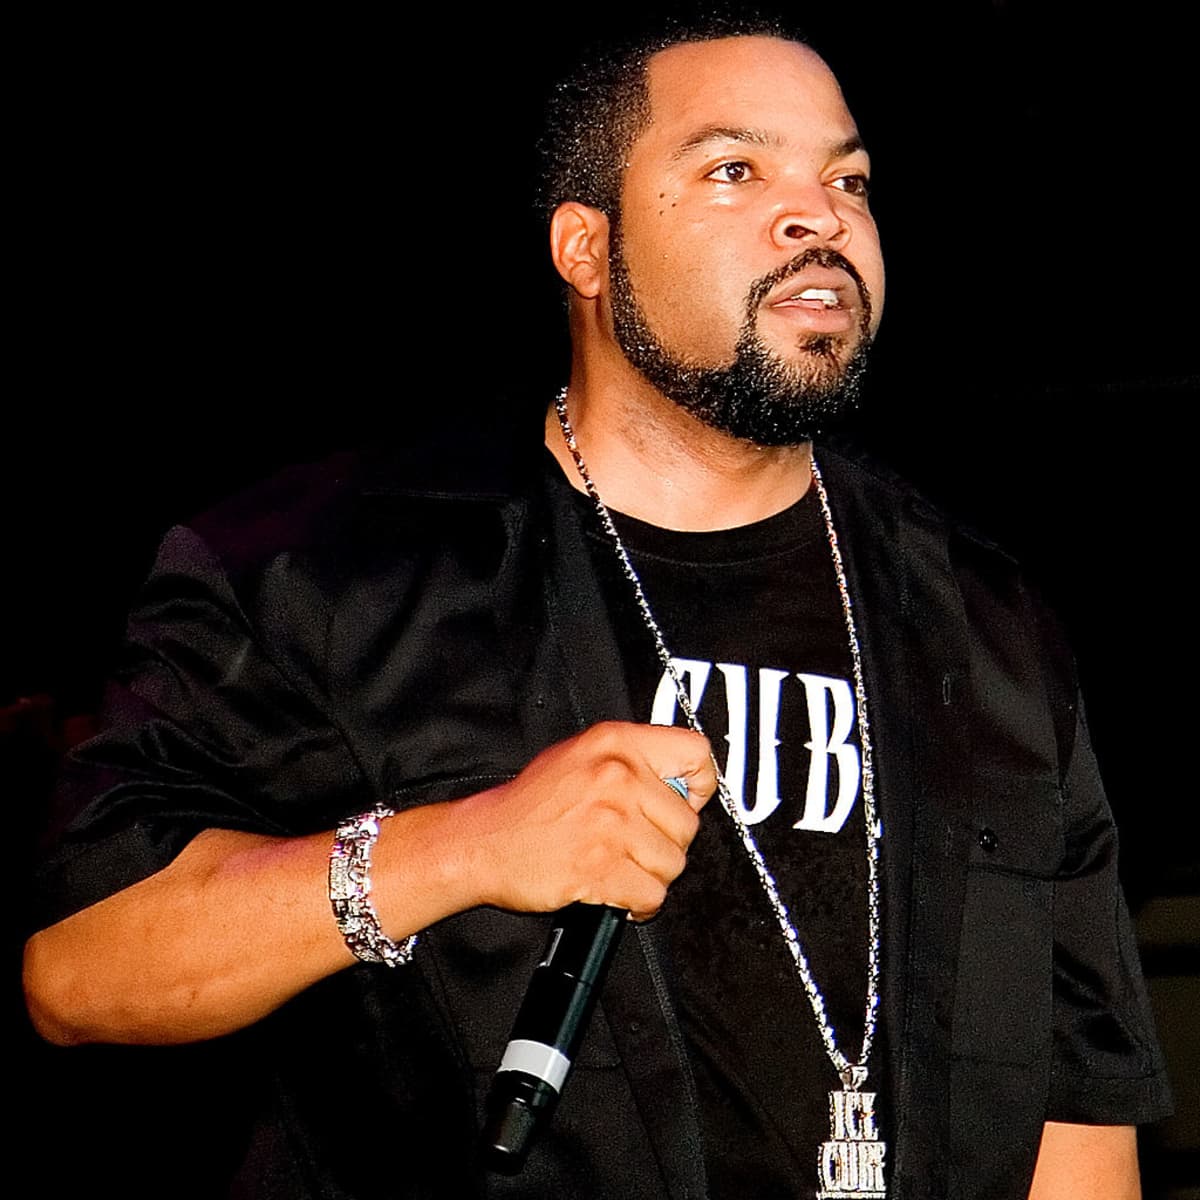 Ice Cube Exposed pic image